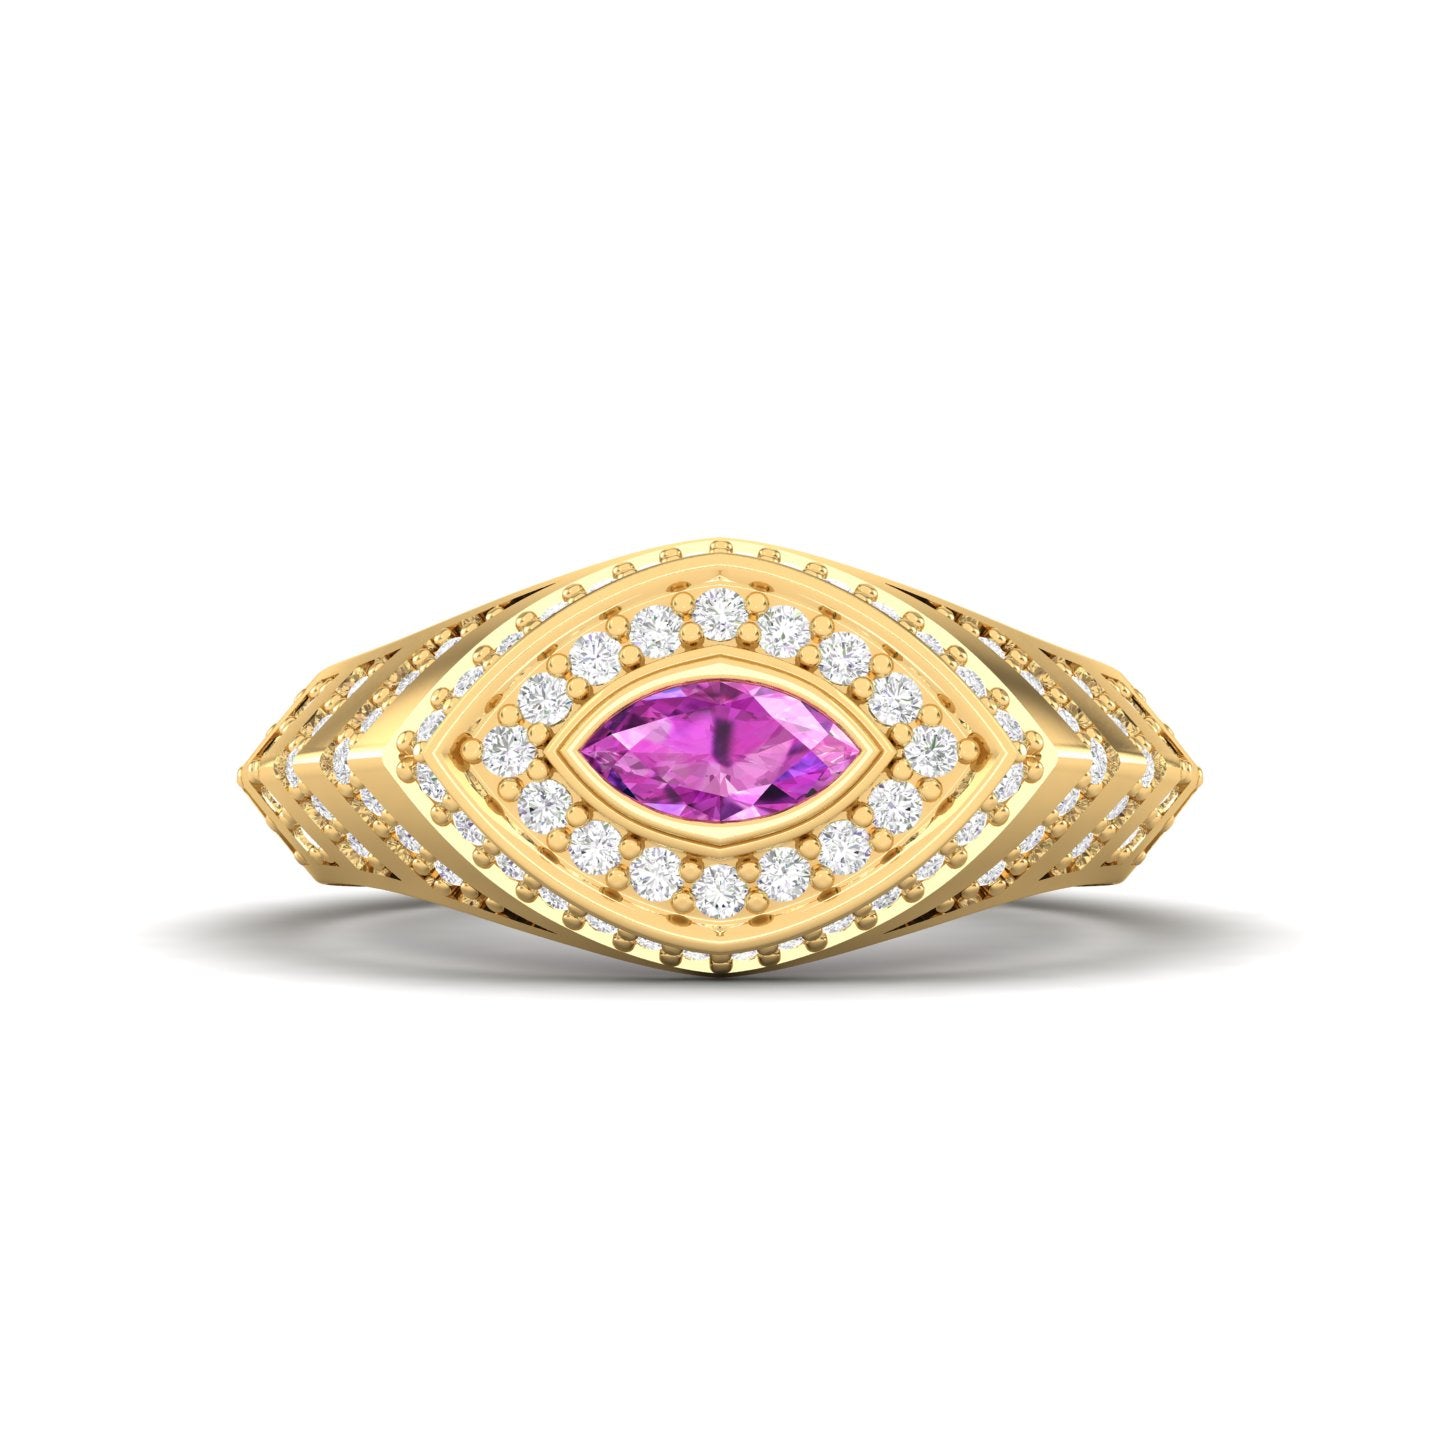 Maurya Yona Pink Amethyst East West Signet Ring with Pave-Set Diamonds